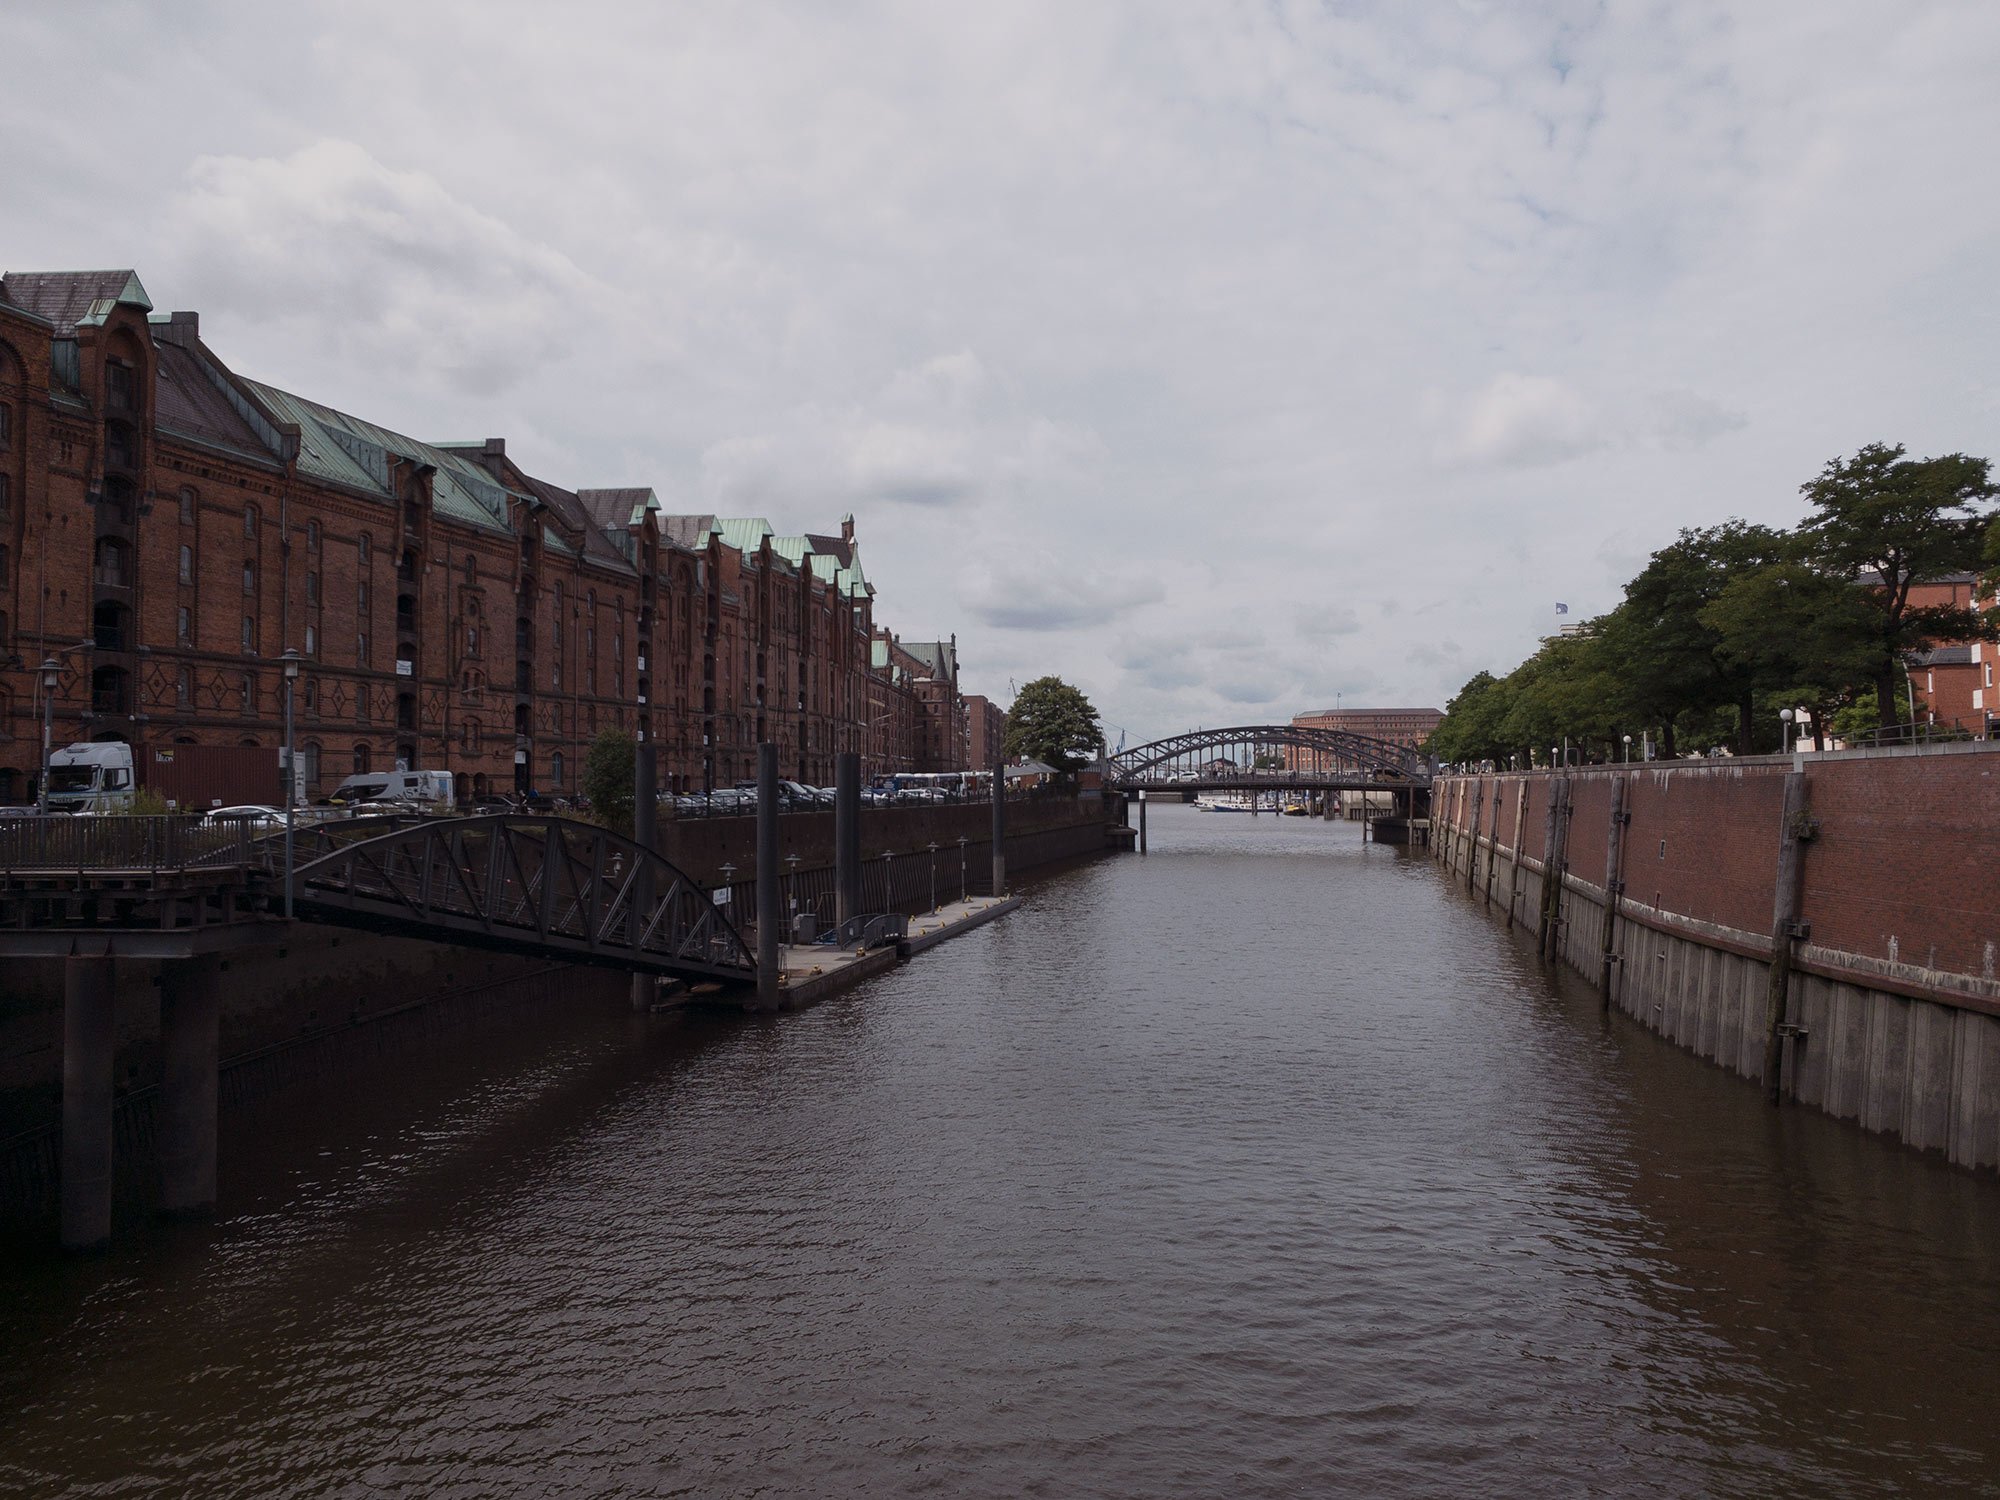 Kicking off the Road Trip in 'The Gateway to the world": Hamburg | A Travel Diary